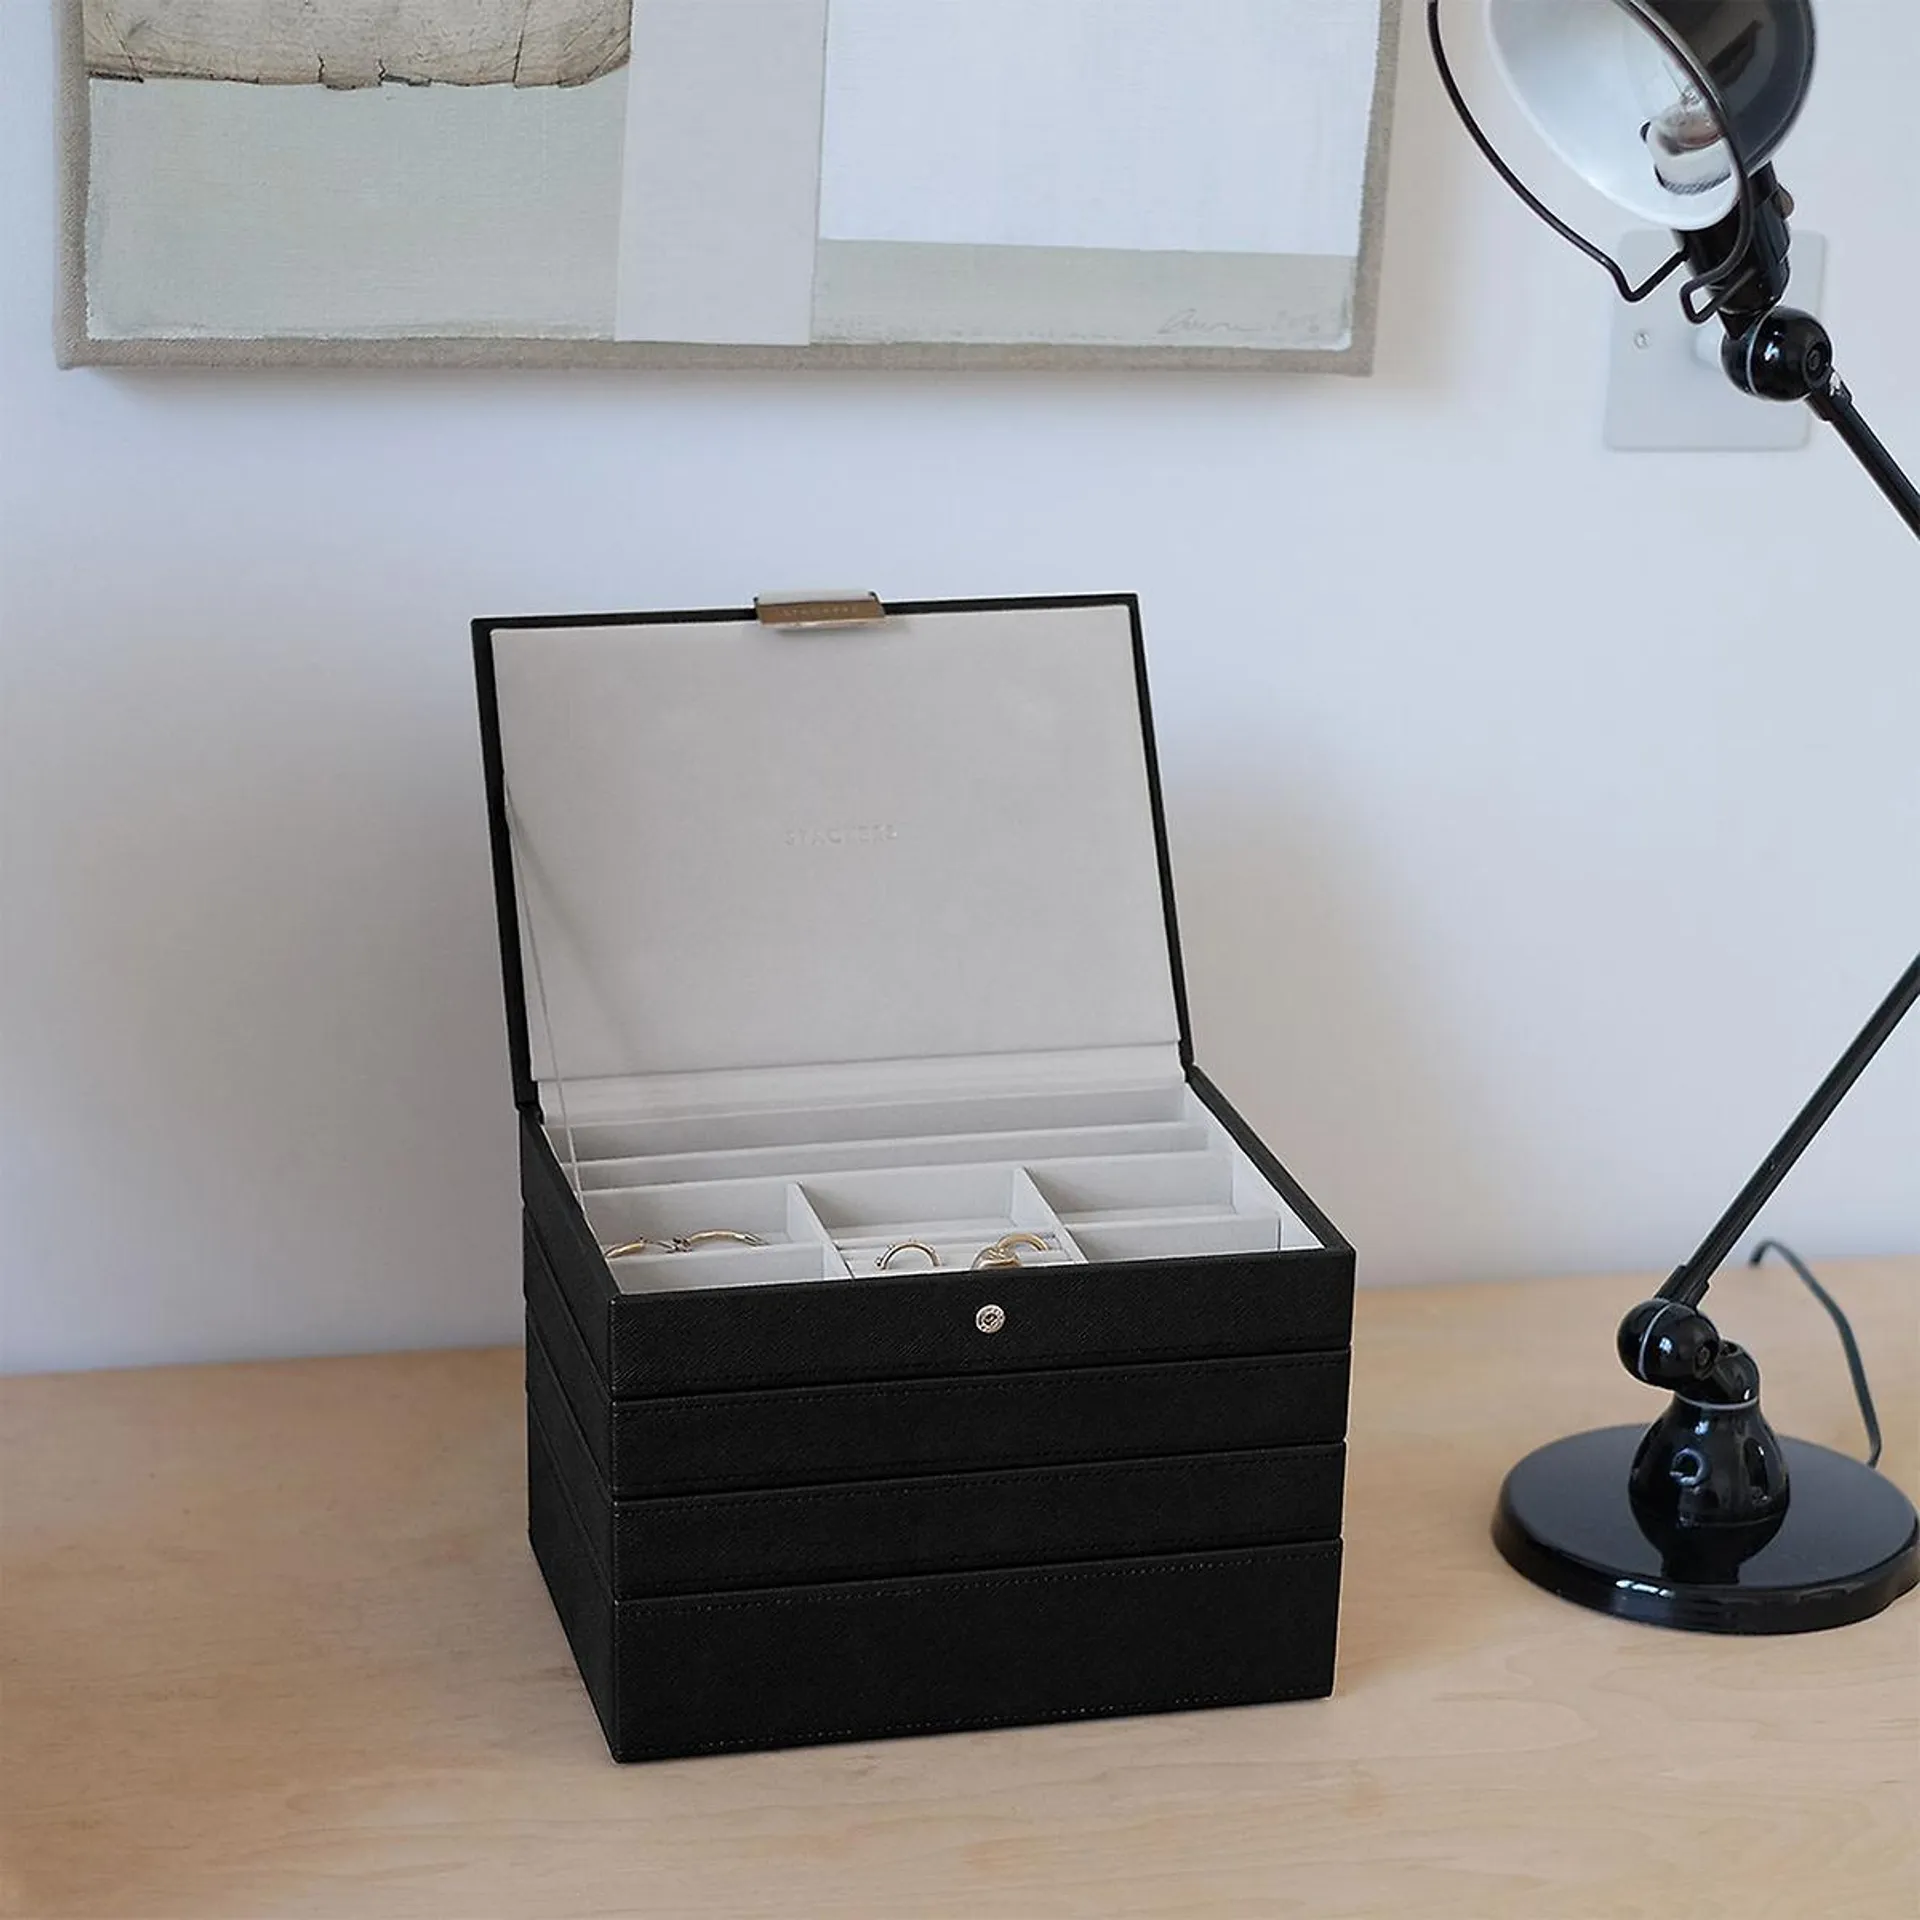 Stackers Black Classic Jewelry Box Collection